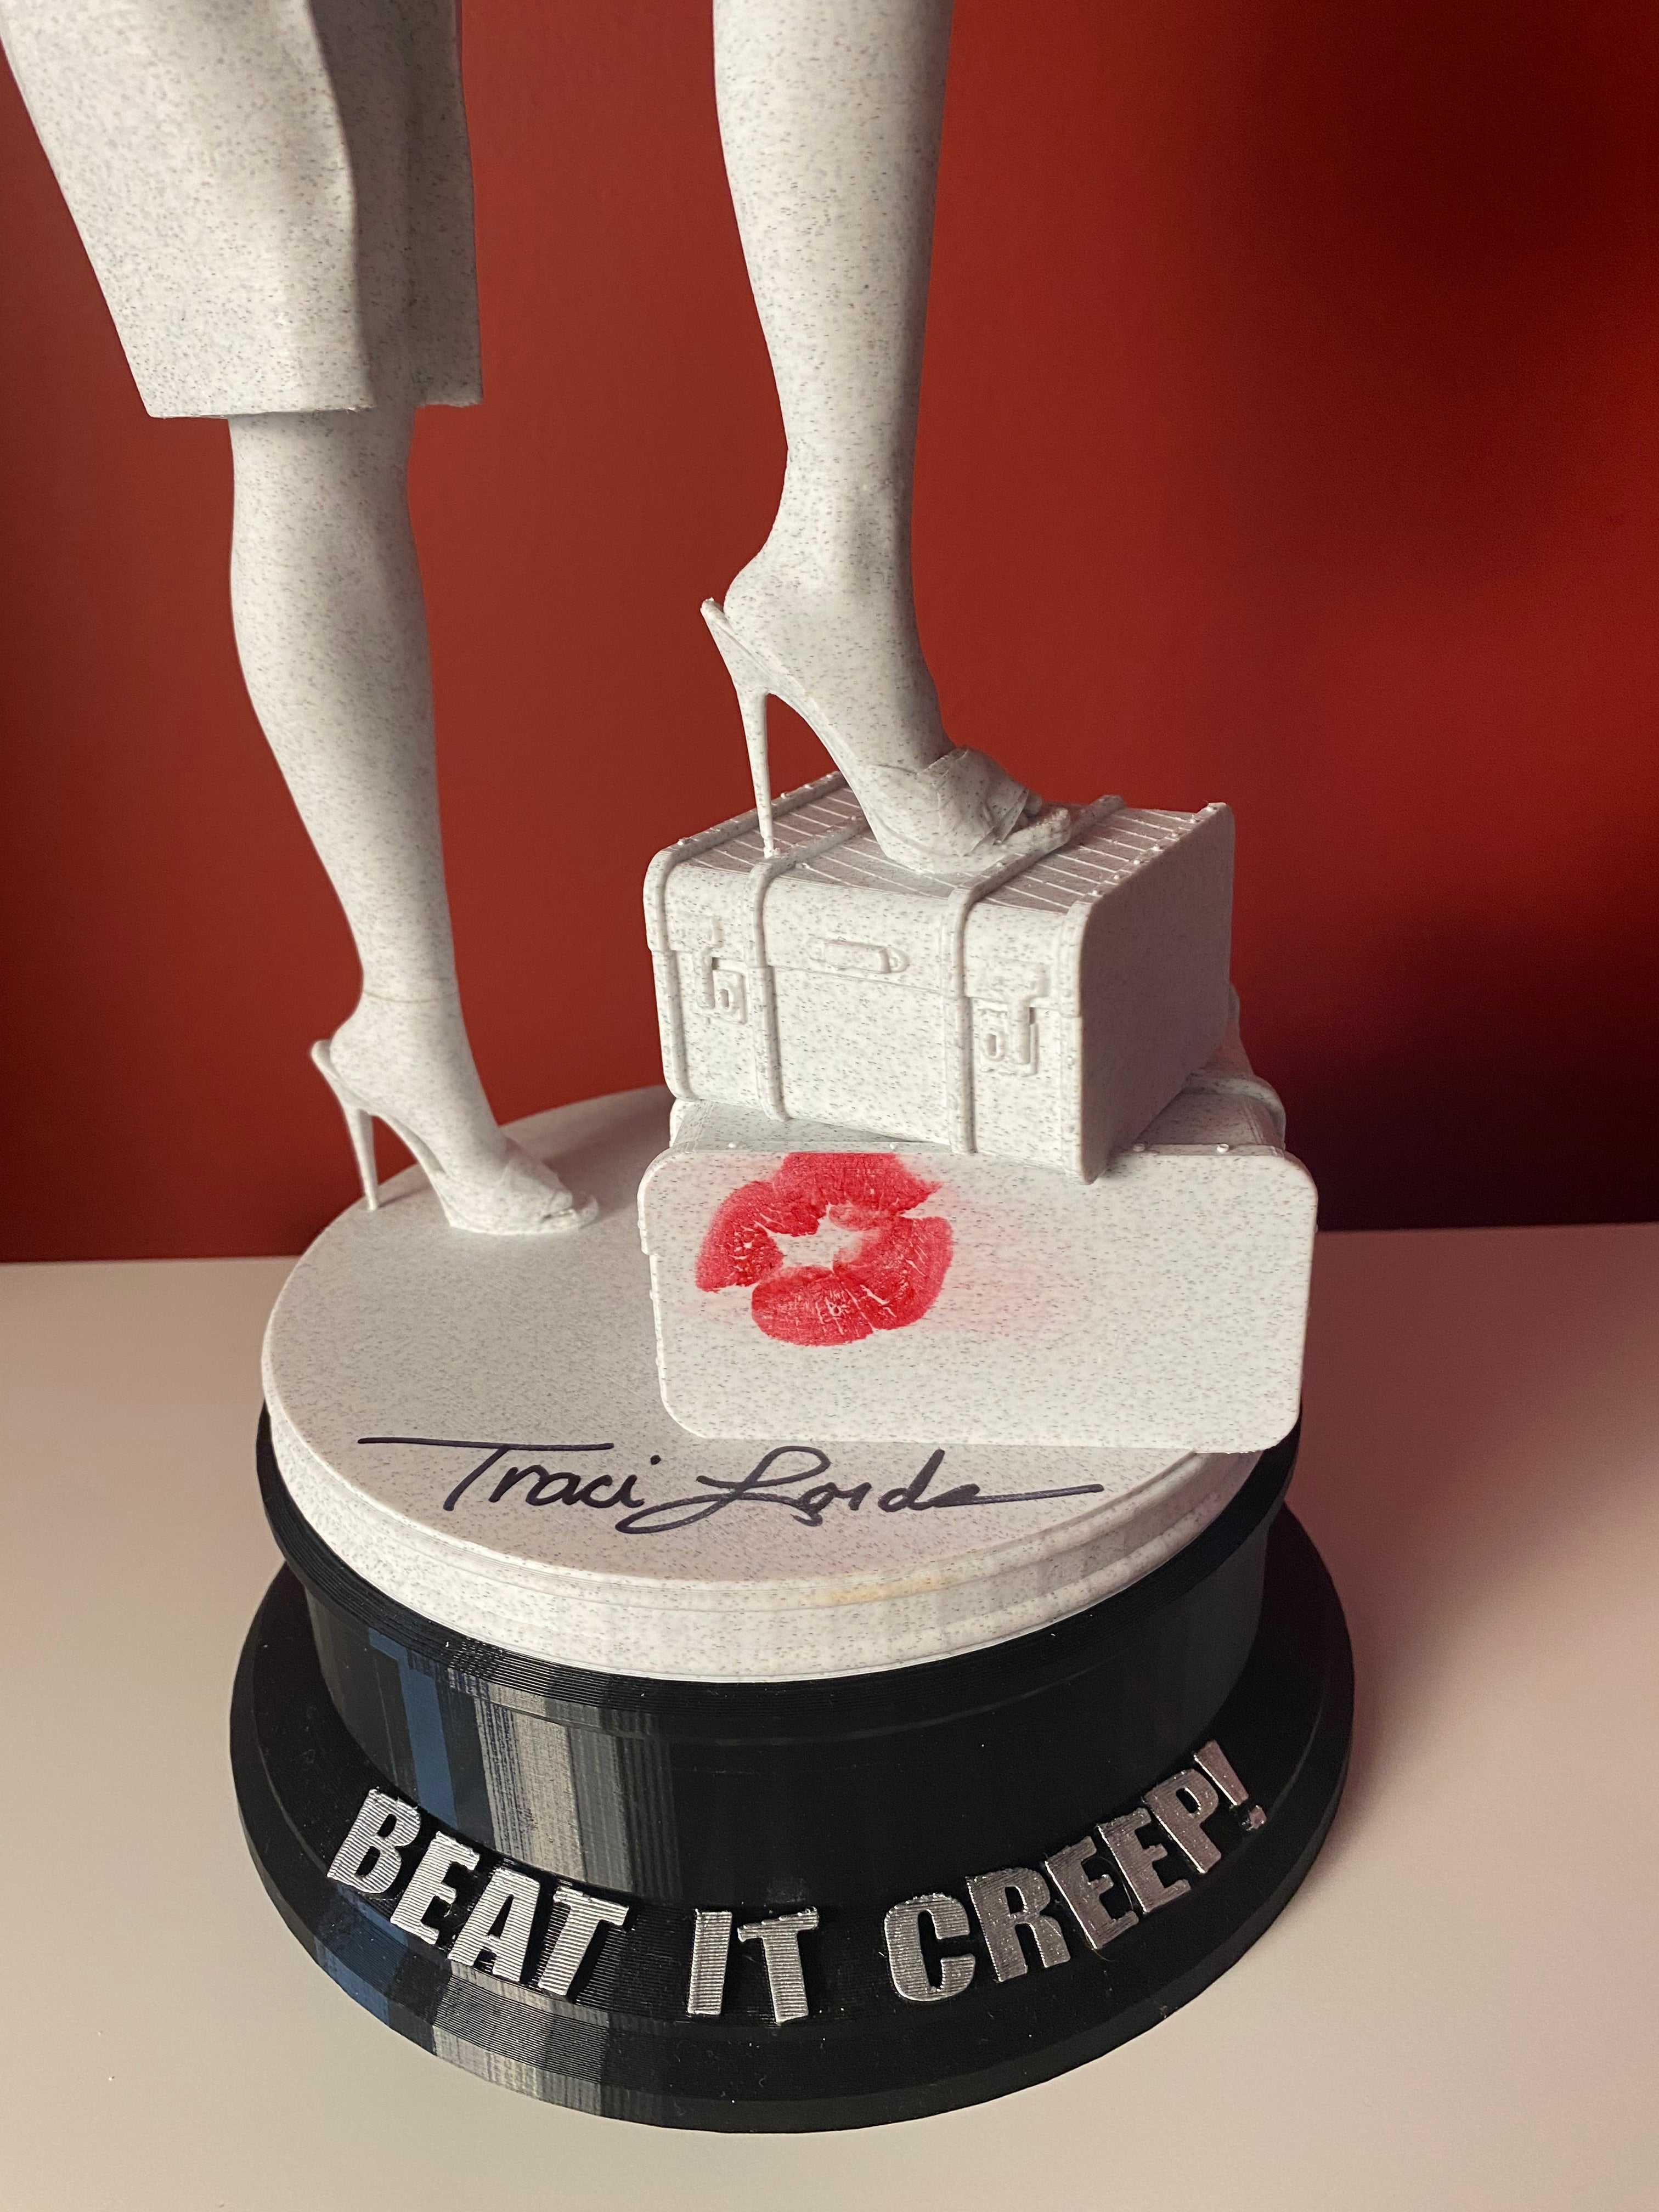 LIMITED EDITION! *** 19 INCH 3D PRINTED "BEAT IT CREEP" STATUE.